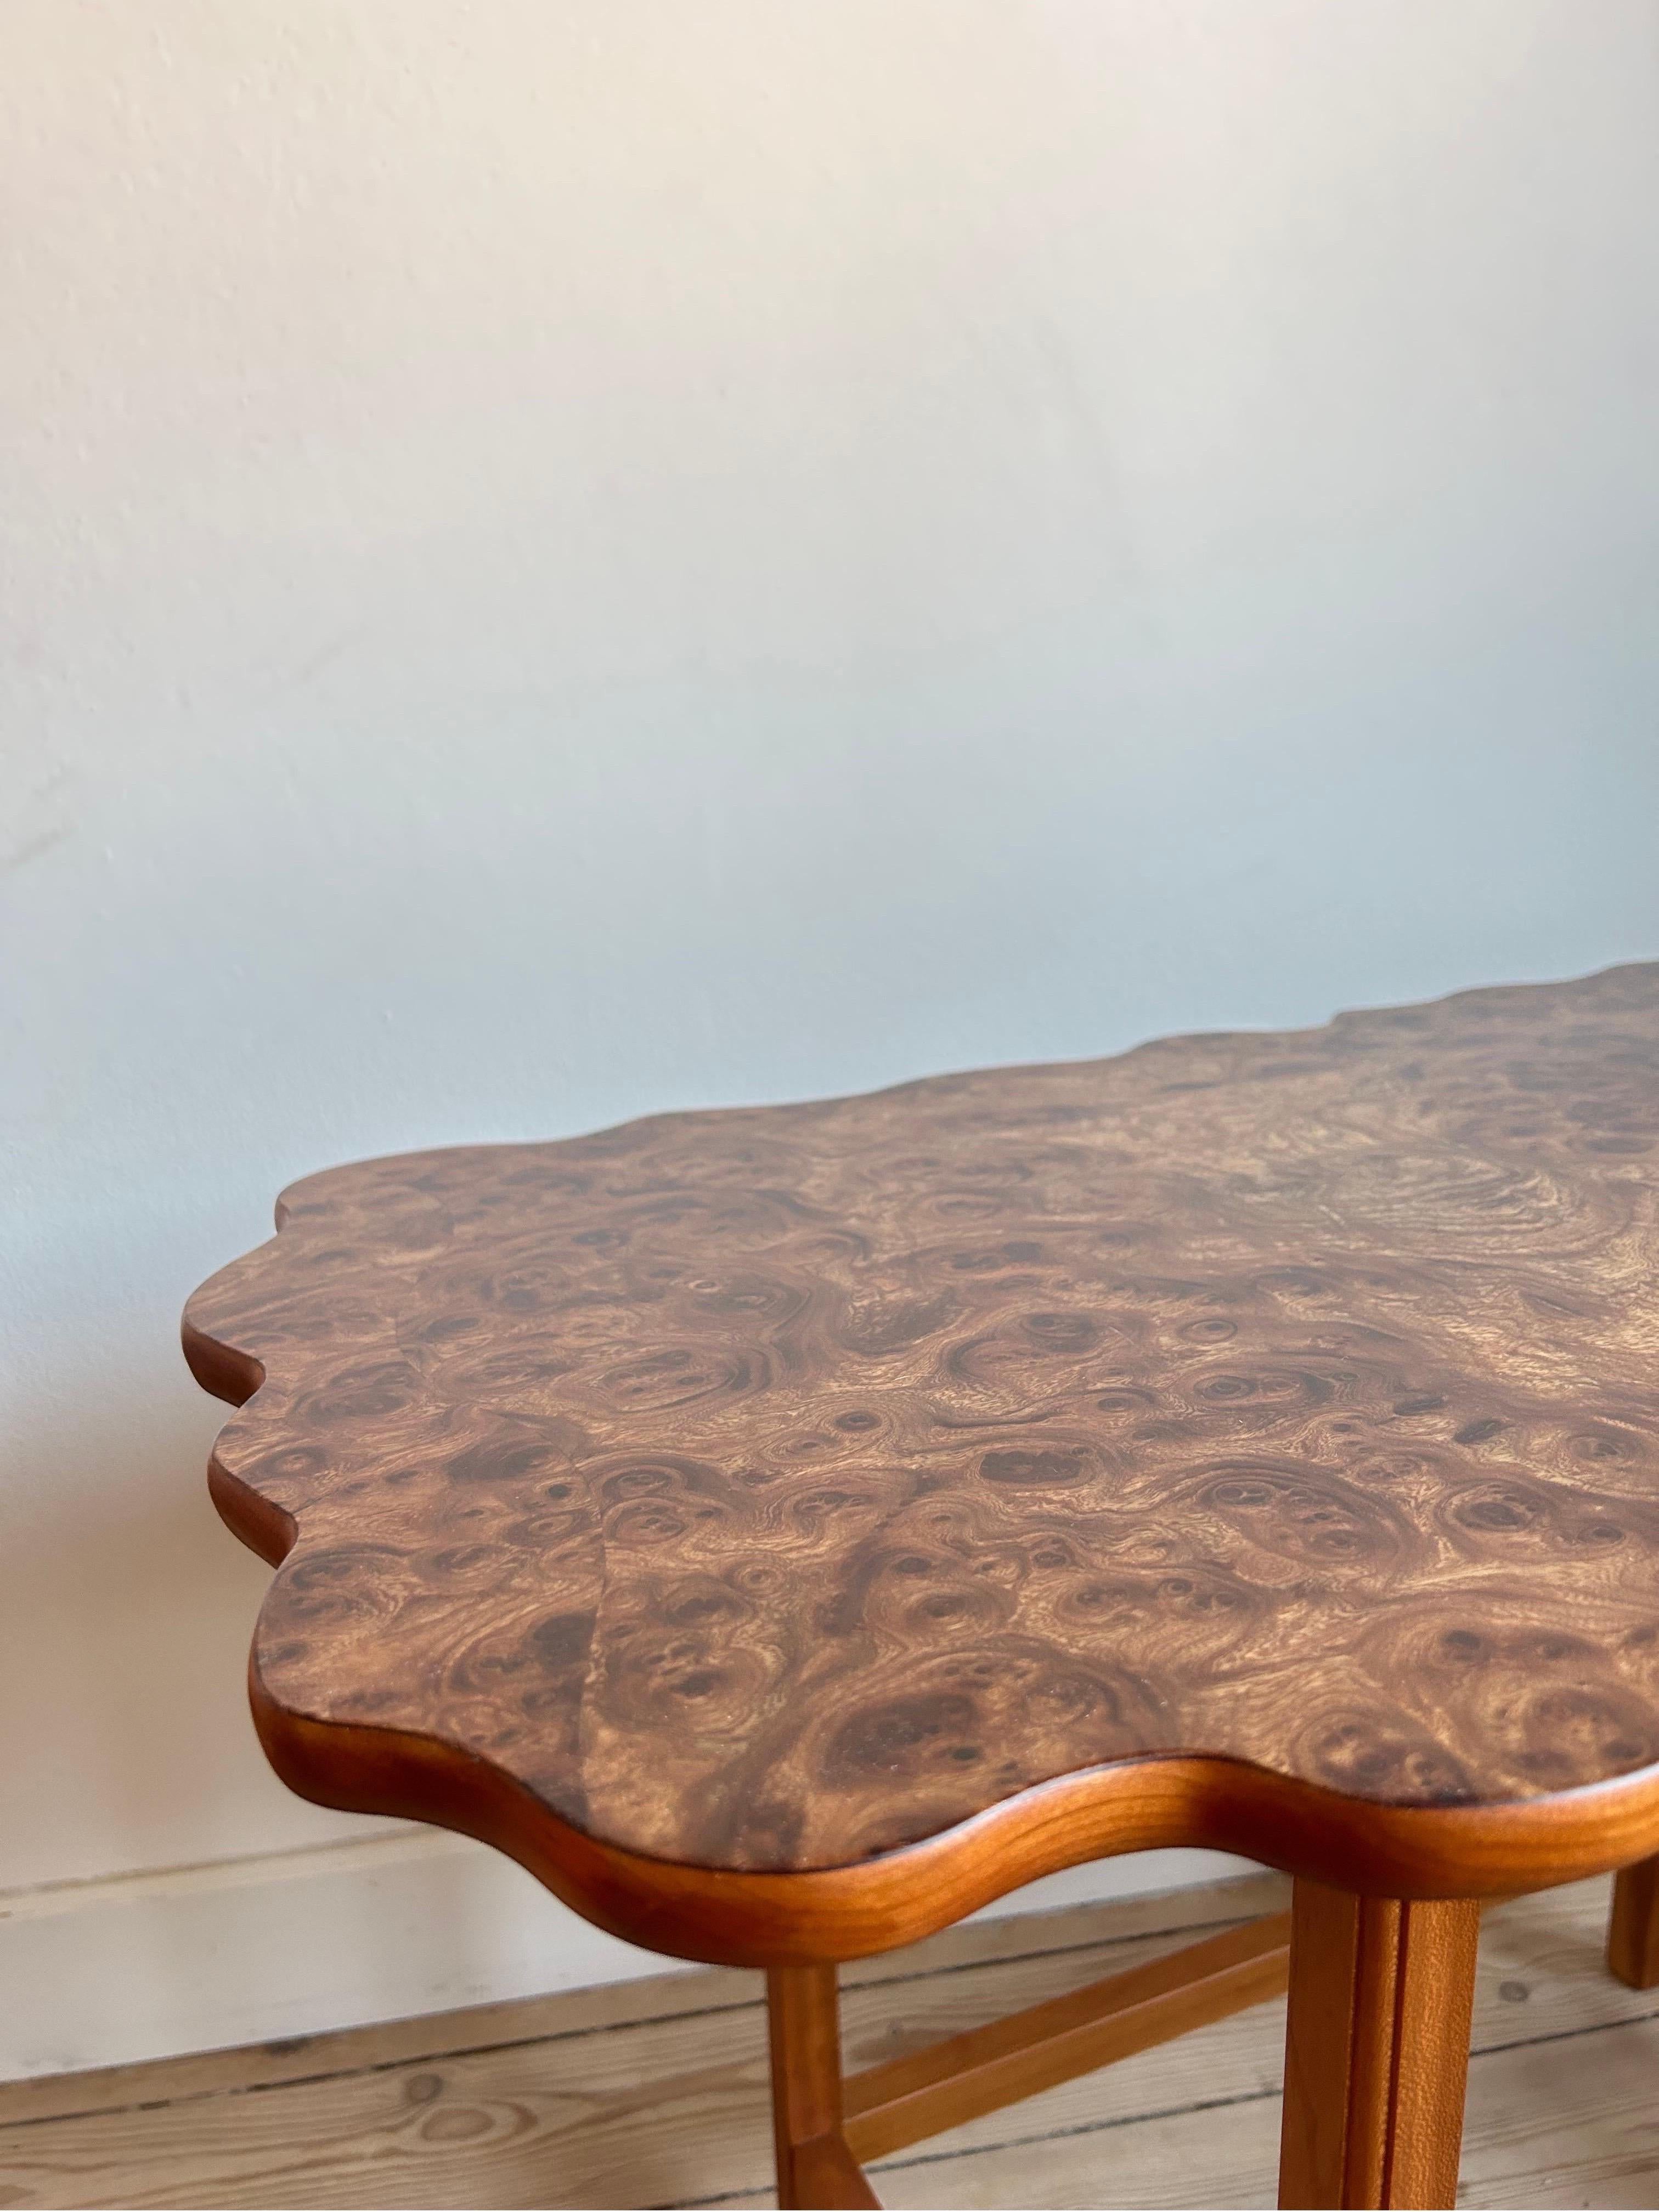 Rare and important Coffe table model 1058 designed by Josef Frank and manufactured by Svenskt tenn. 
The table has a table top made in elm root and legs made of solid walnut with profiled edges on the legs.

This table was designed to give the